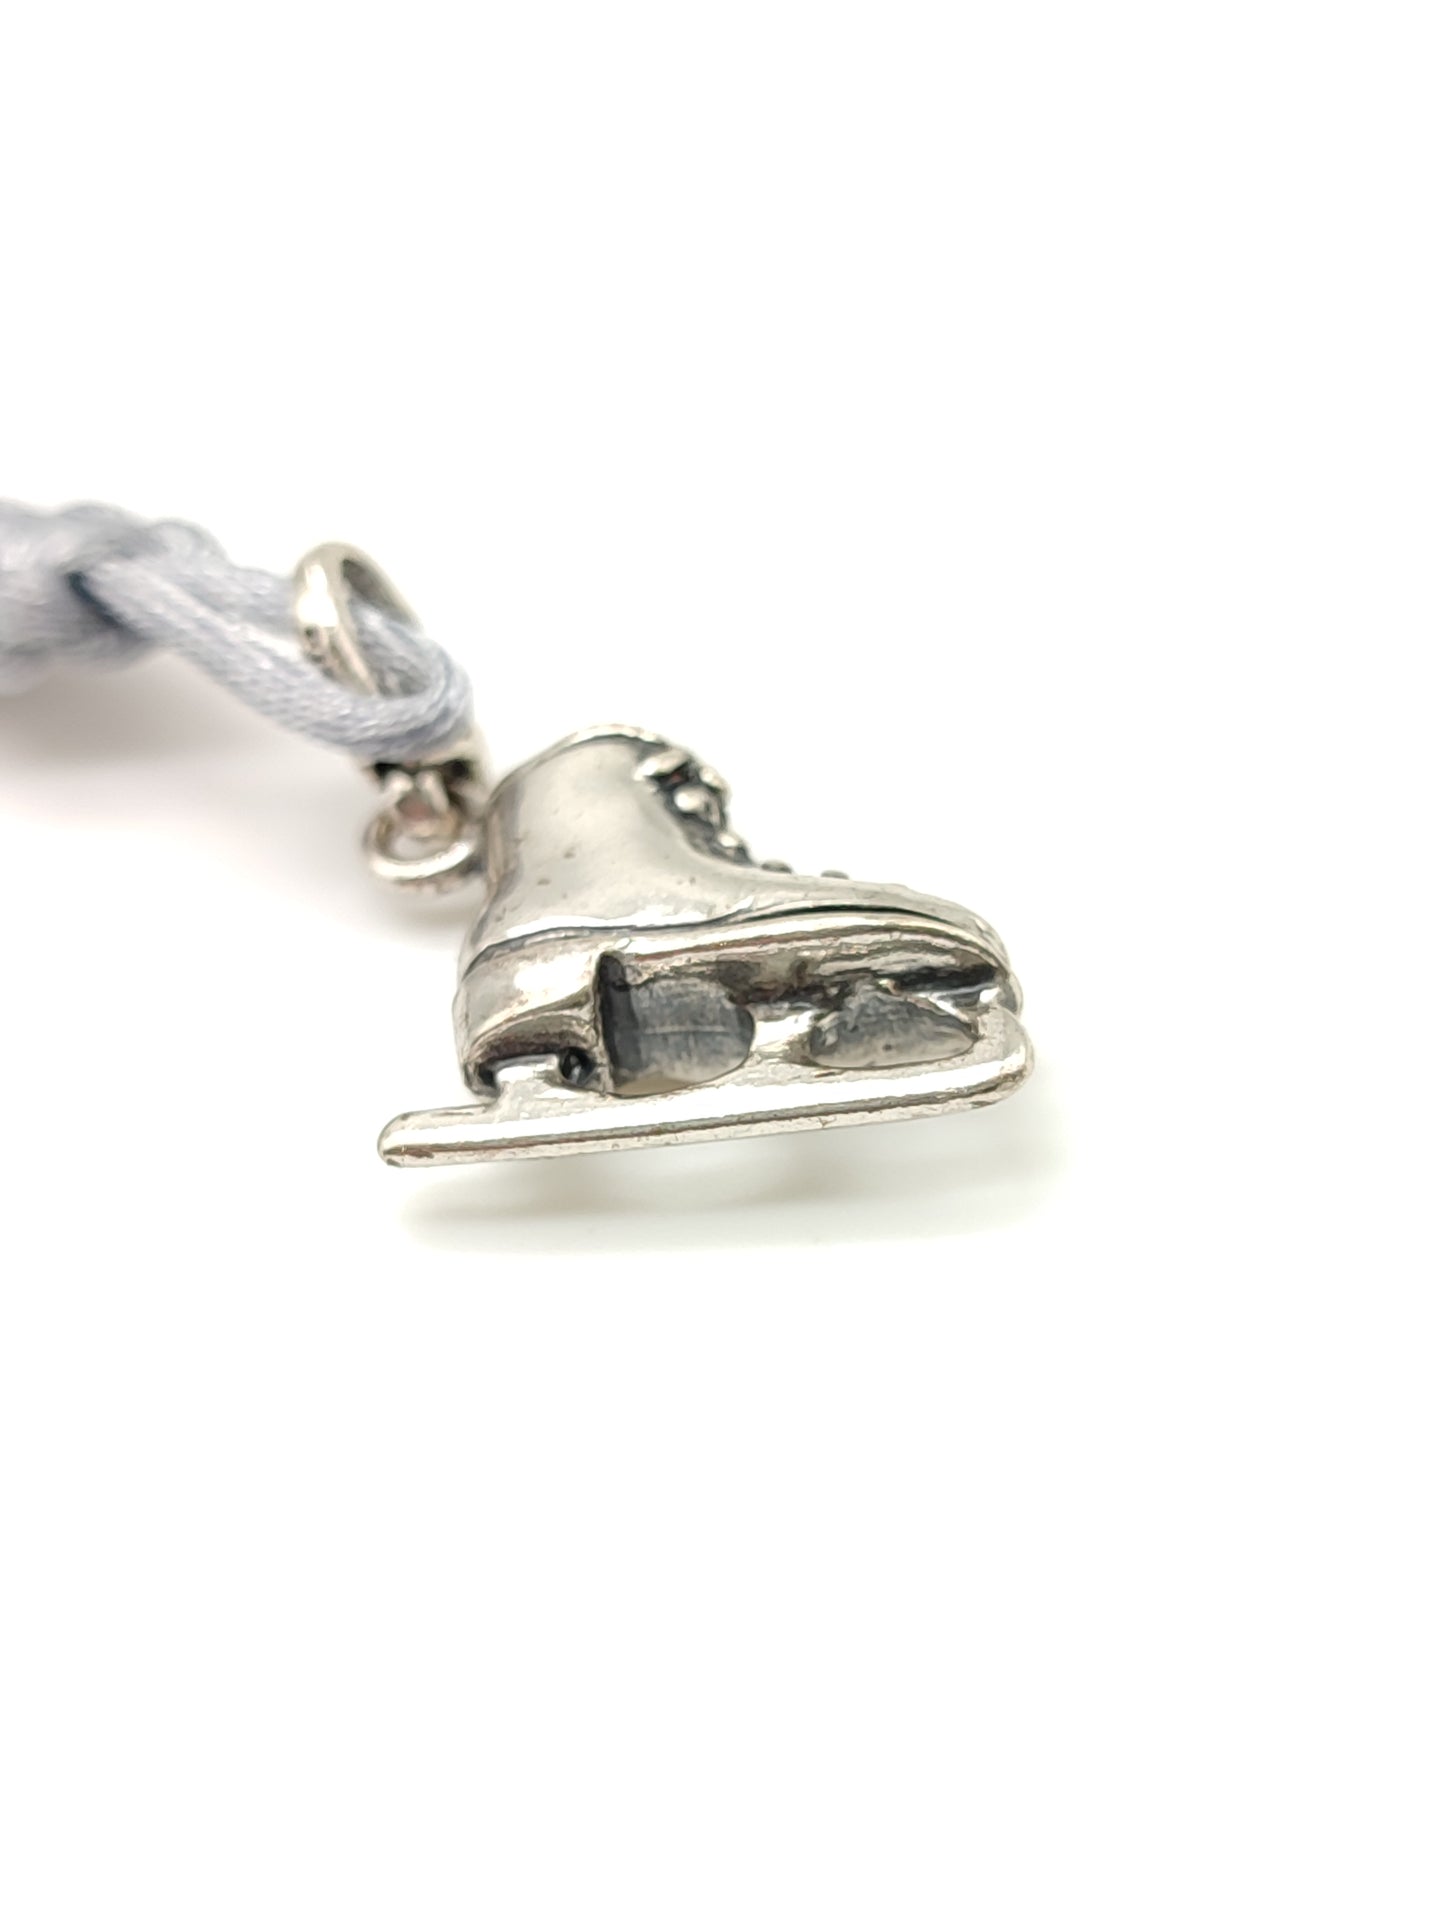 Silver ice skate key ring with satin cord